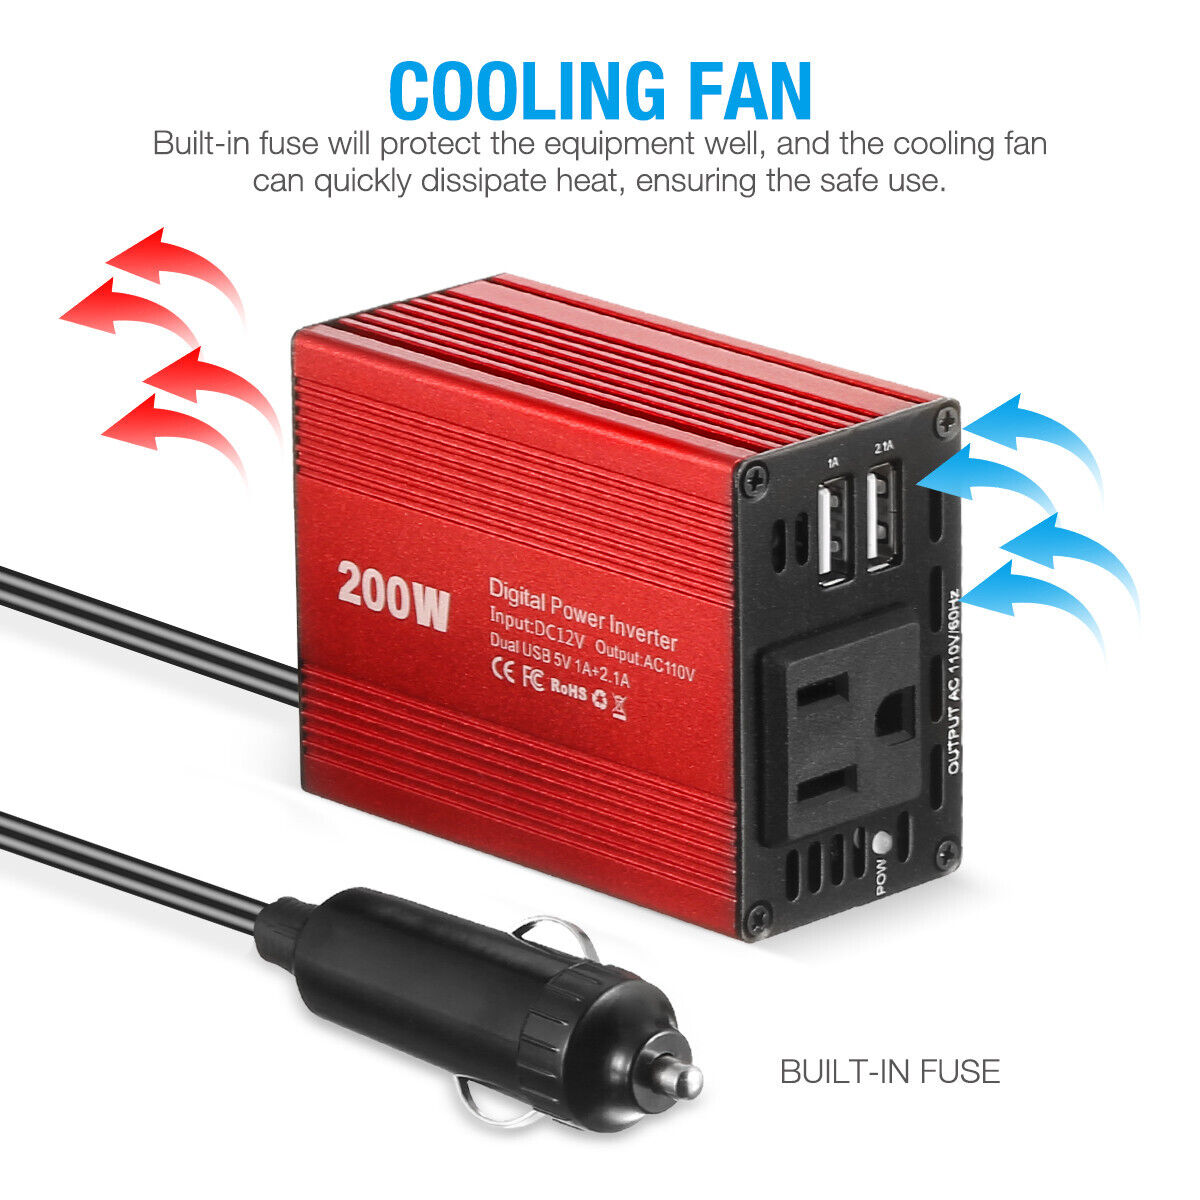 200W Car Power Inverter DC 12V to AC 110V 120V Converter Adapter Charger Outlet Powerextra Does Not Apply - фотография #5